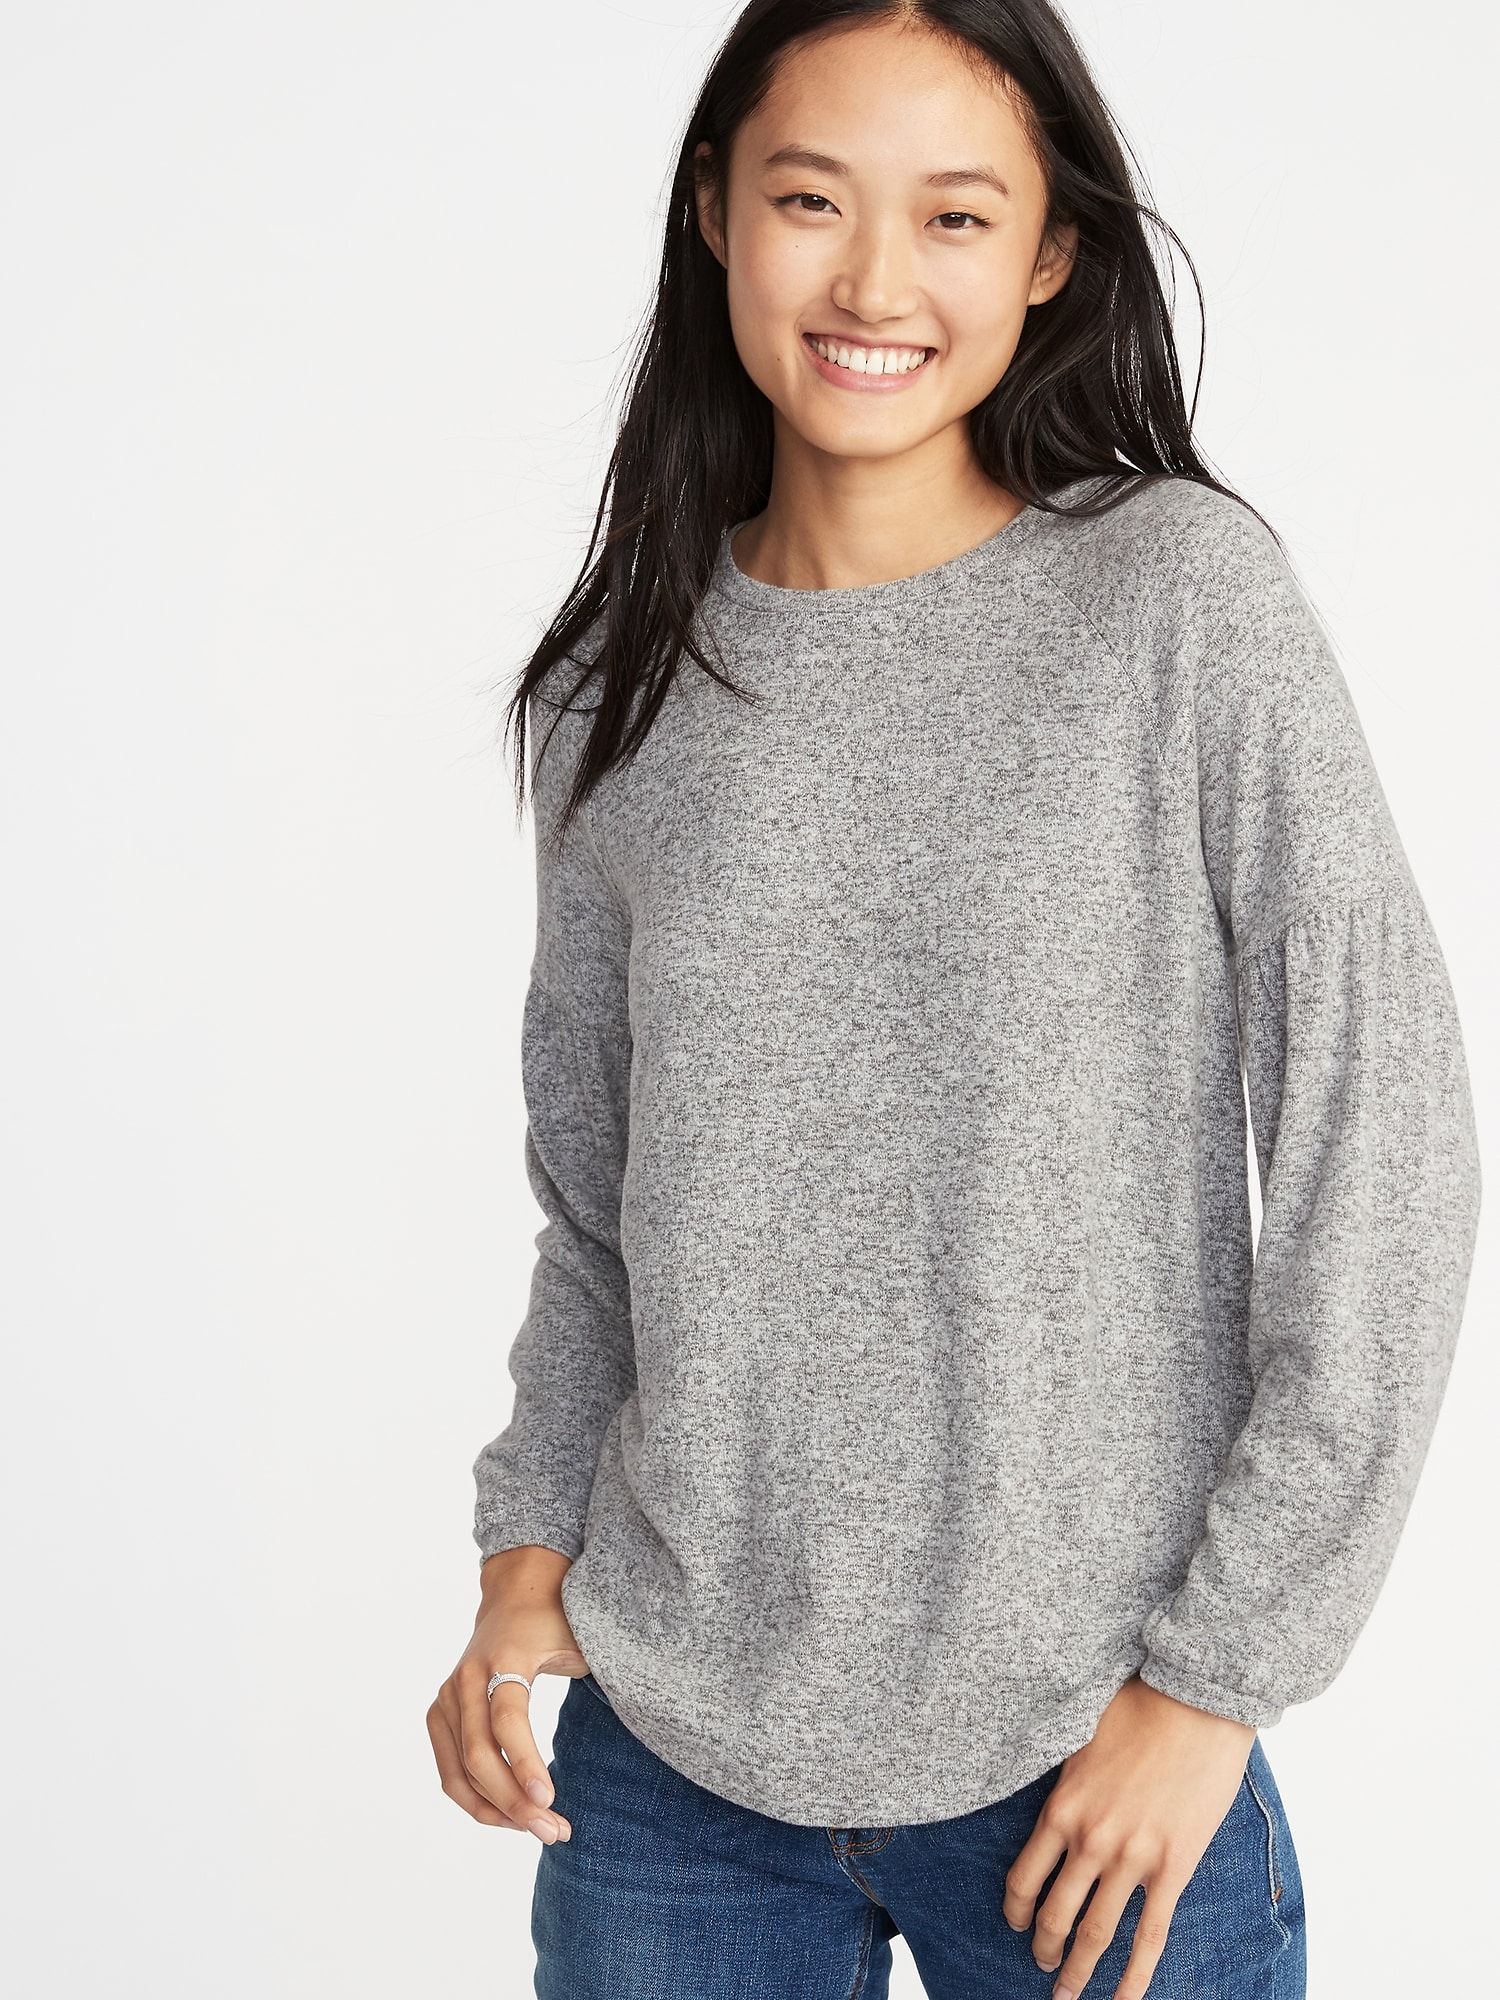 Plush-Knit Balloon-Sleeve Top for Women | Old Navy